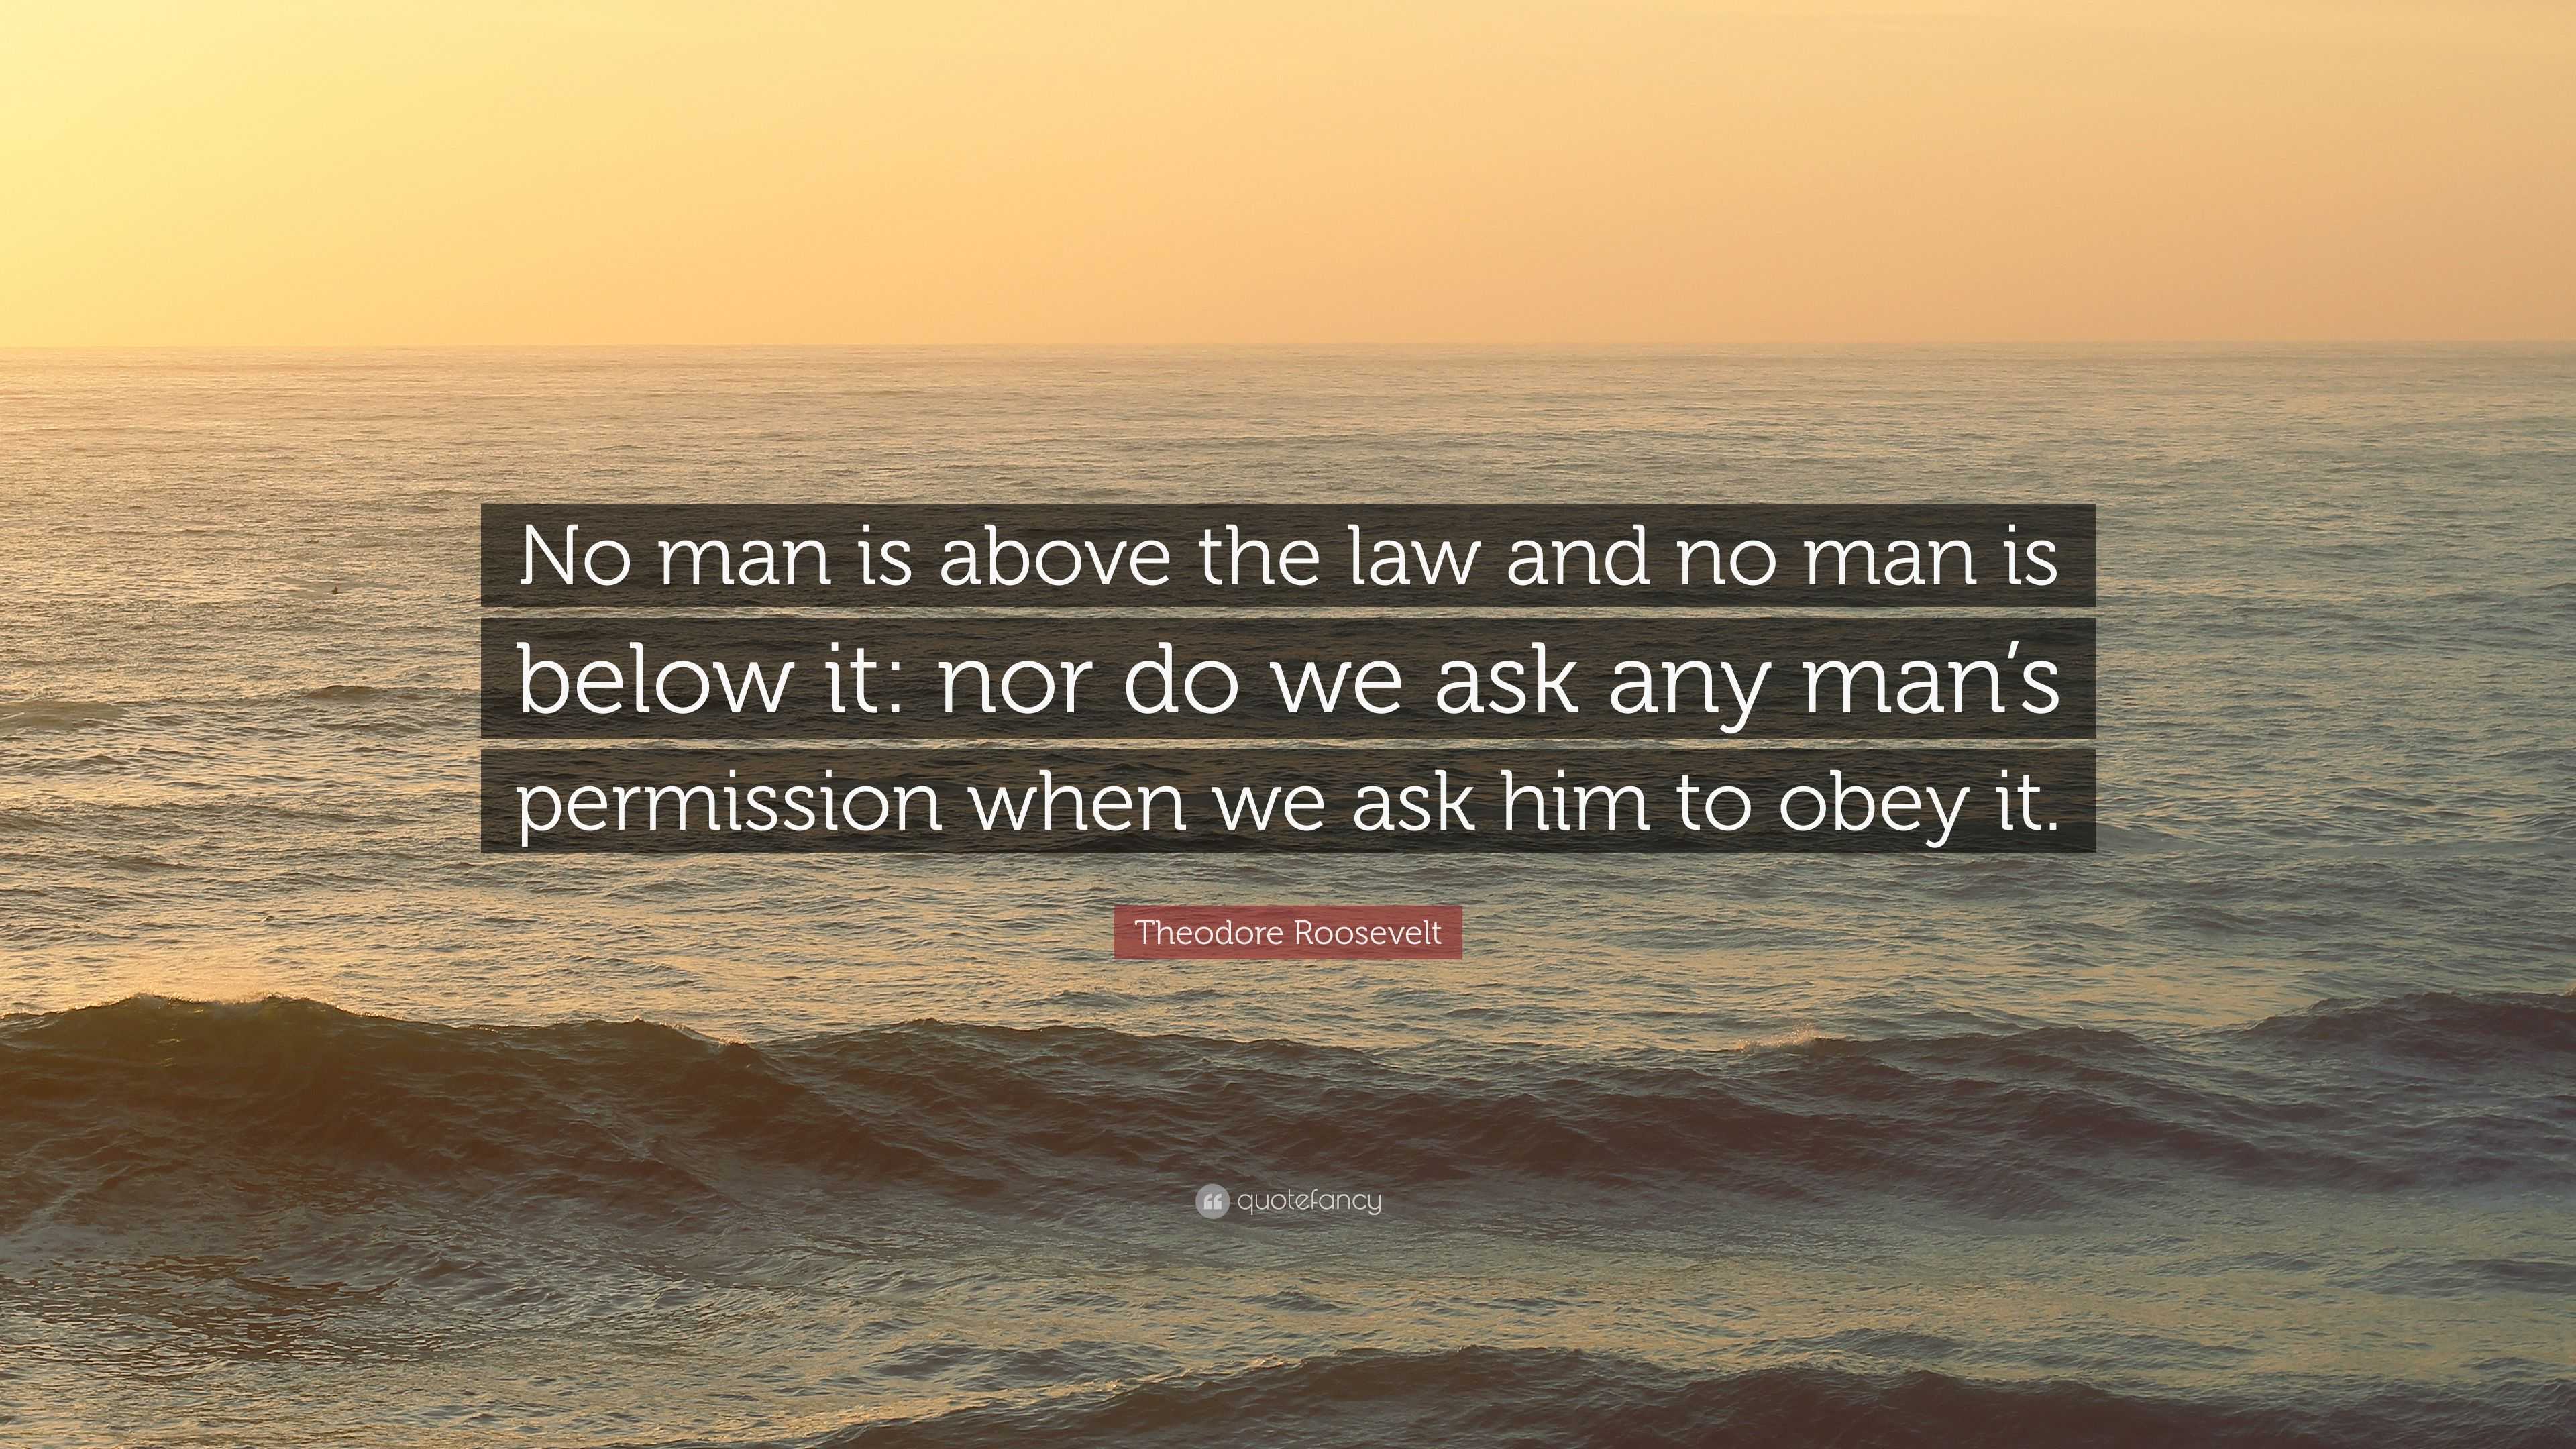 https://quotefancy.com/media/wallpaper/3840x2160/2085974-Theodore-Roosevelt-Quote-No-man-is-above-the-law-and-no-man-is.jpg